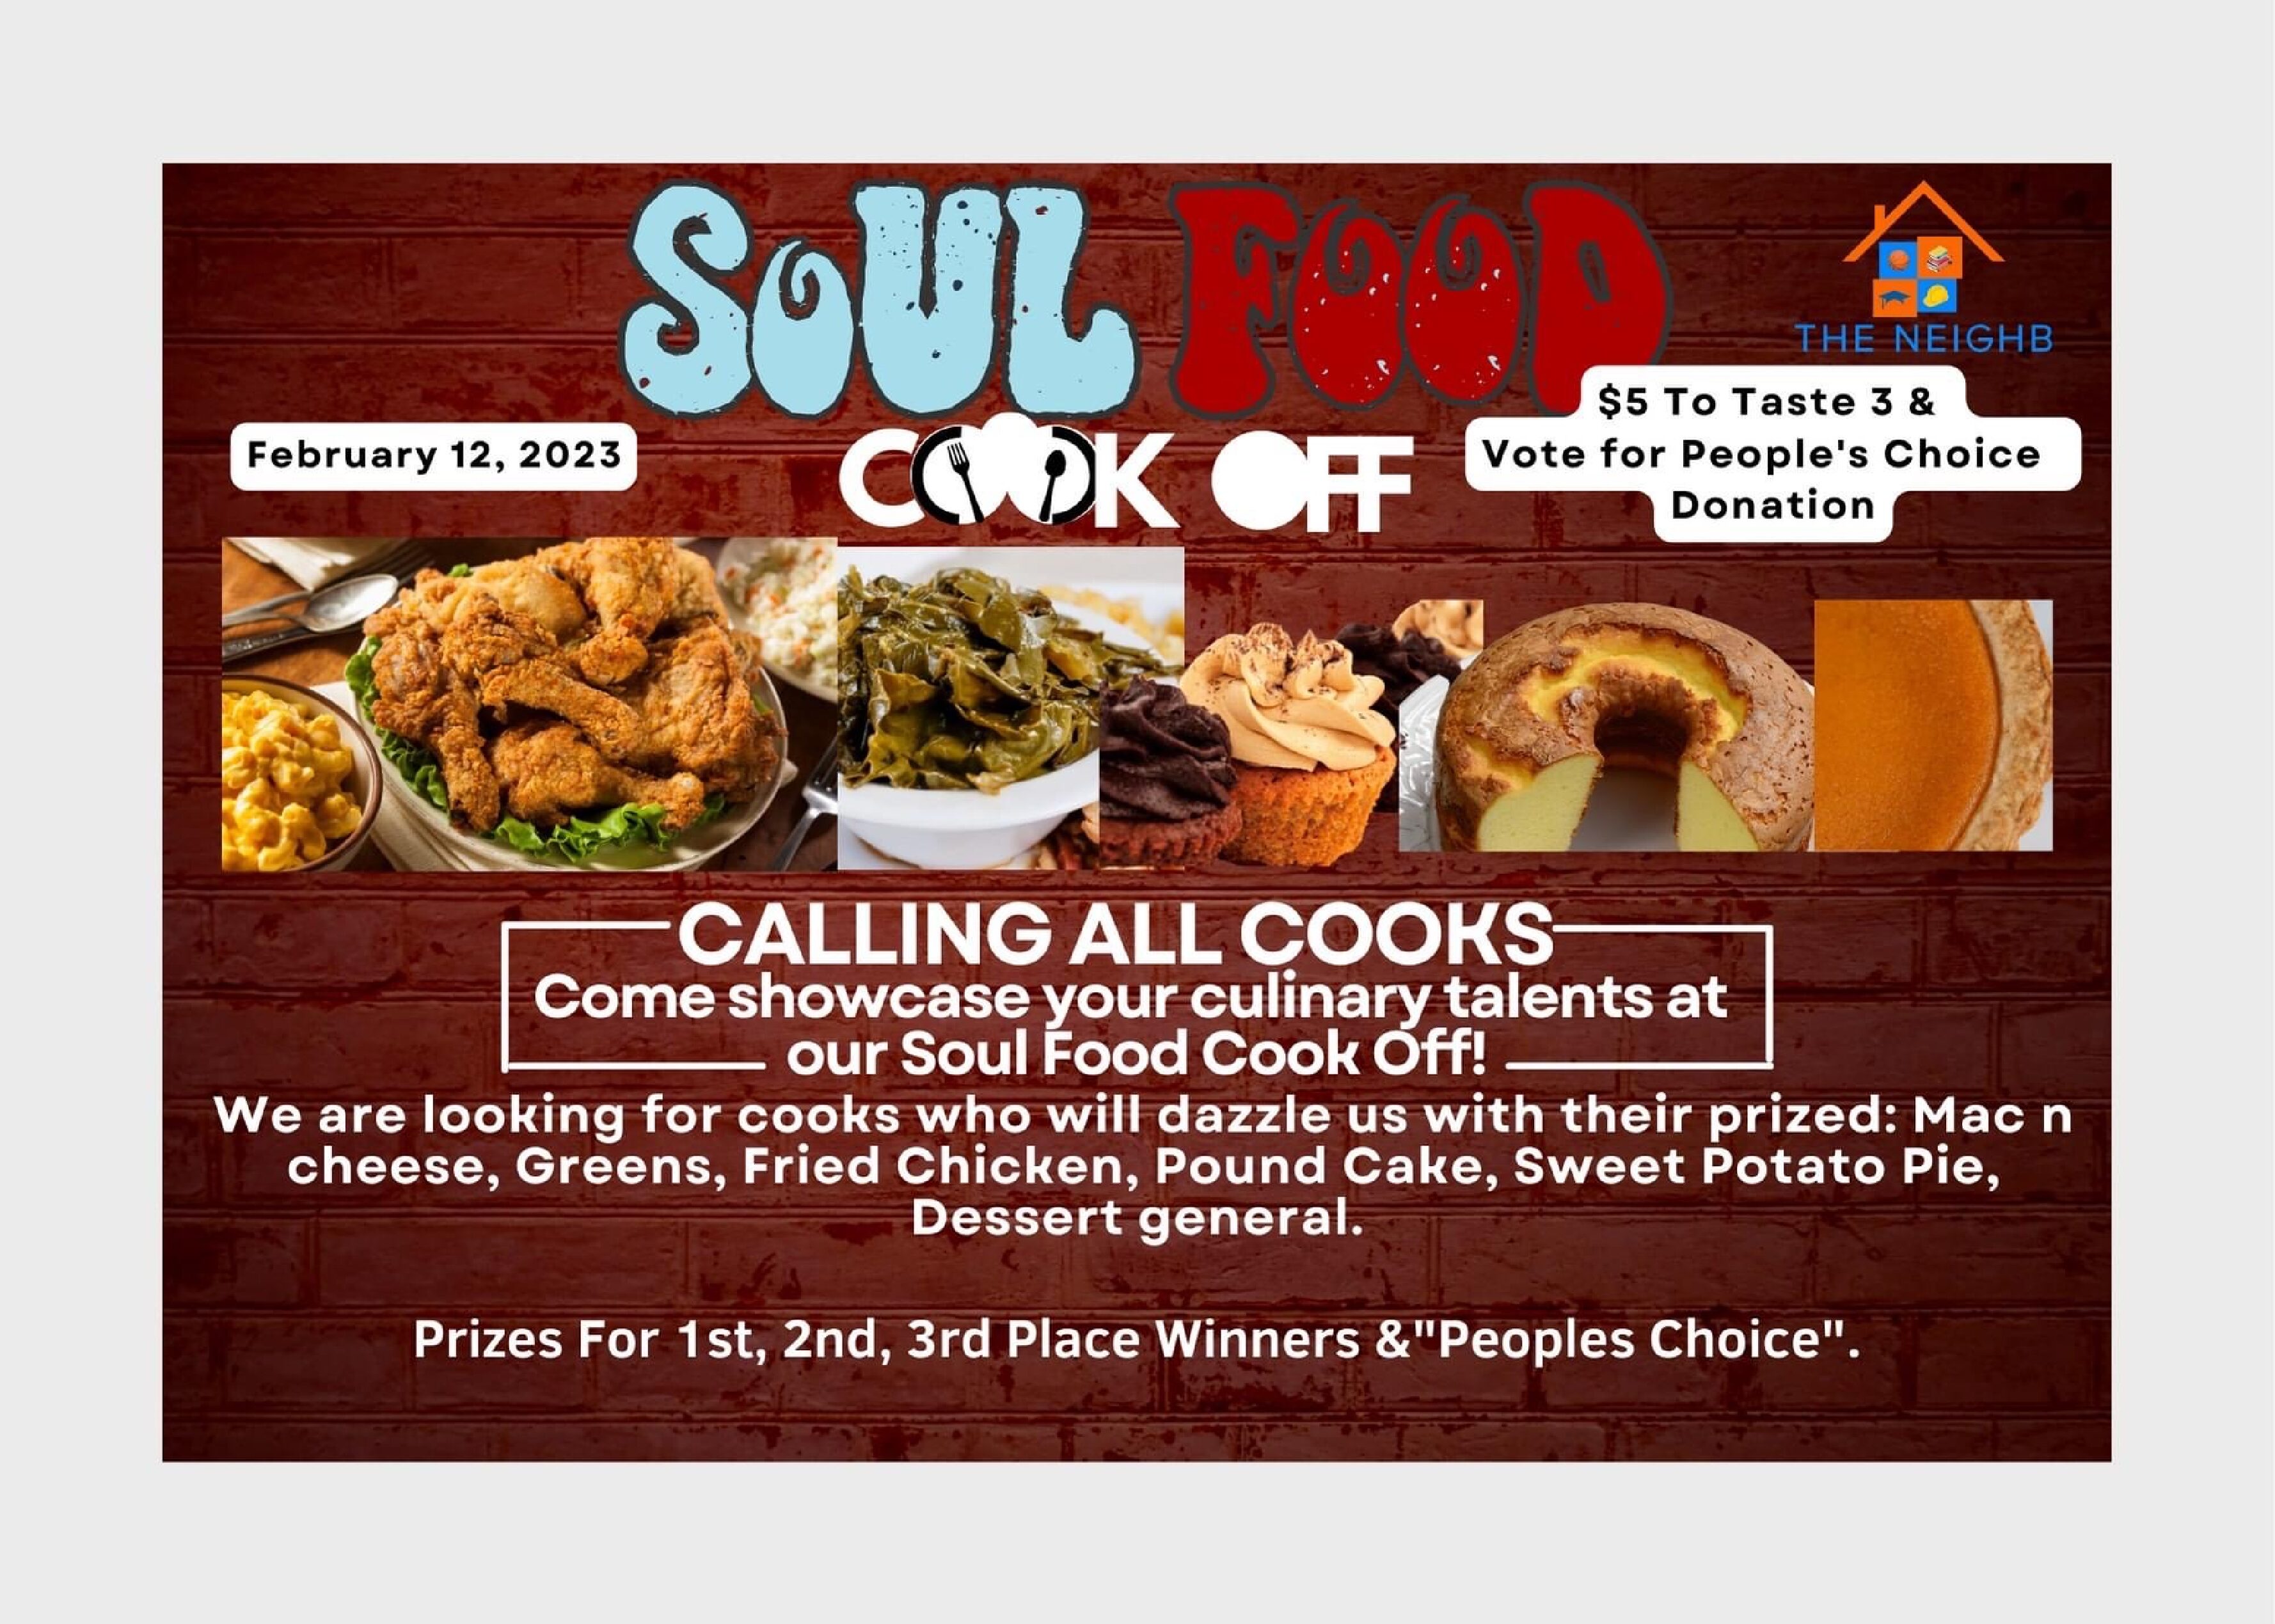 <h1 class="tribe-events-single-event-title">The NeighB presents :THE SOUL FOOD COOK OFF!</h1>